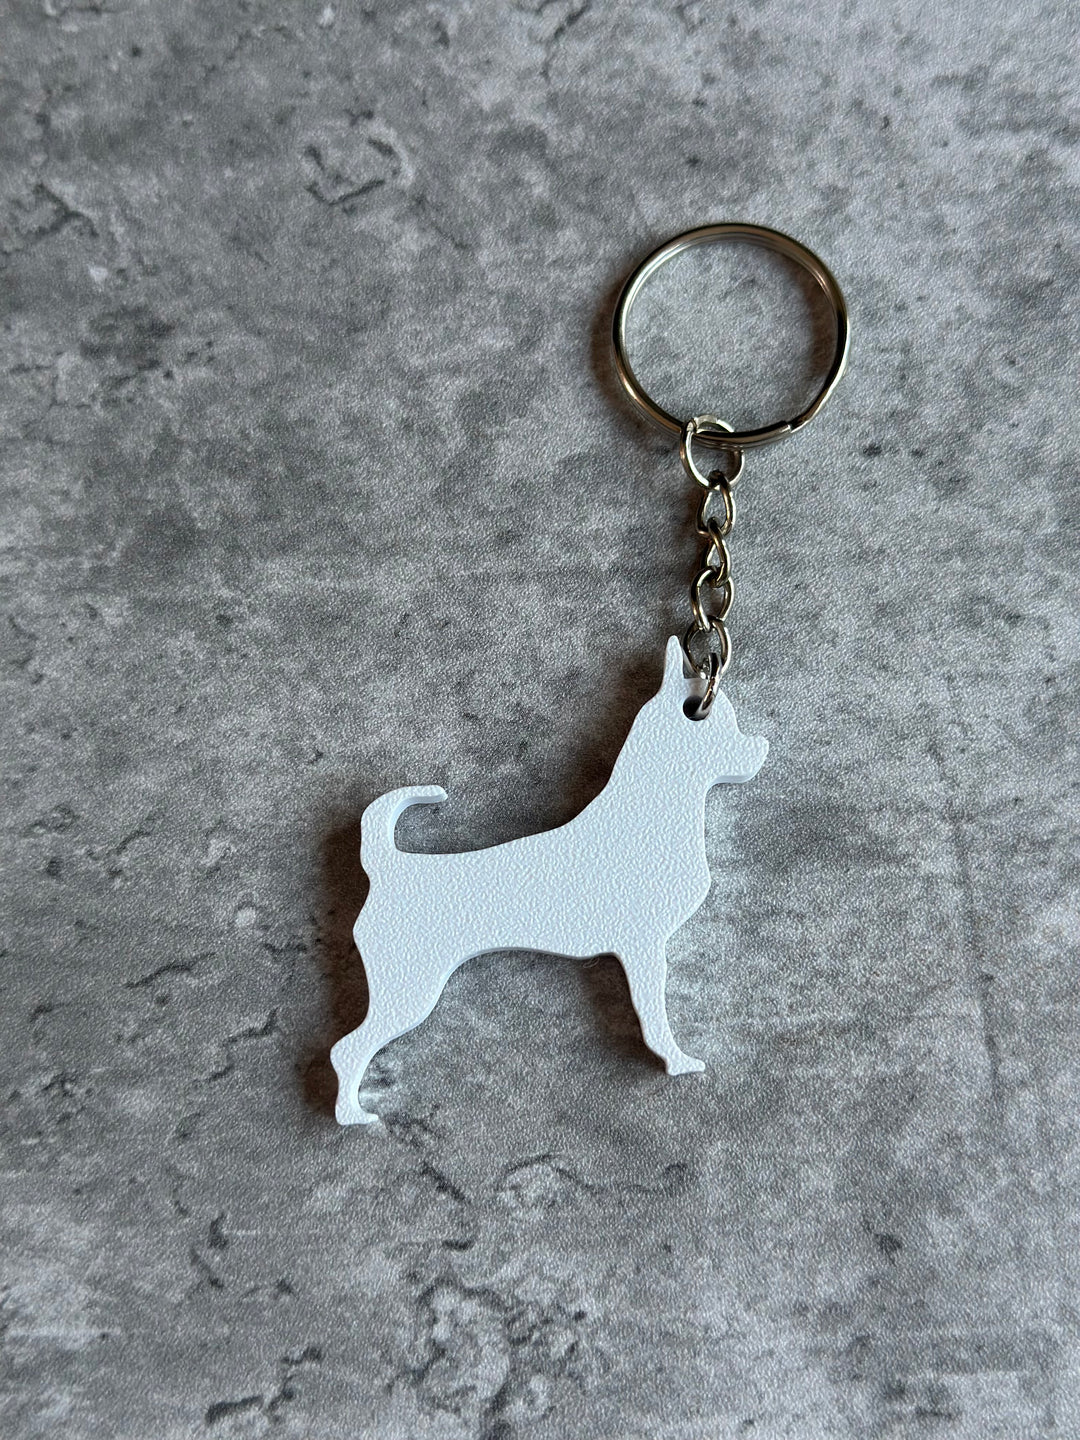   Chihuhaua Dog Keyring Stl File |3D Printed | Unique Personalised Gifts